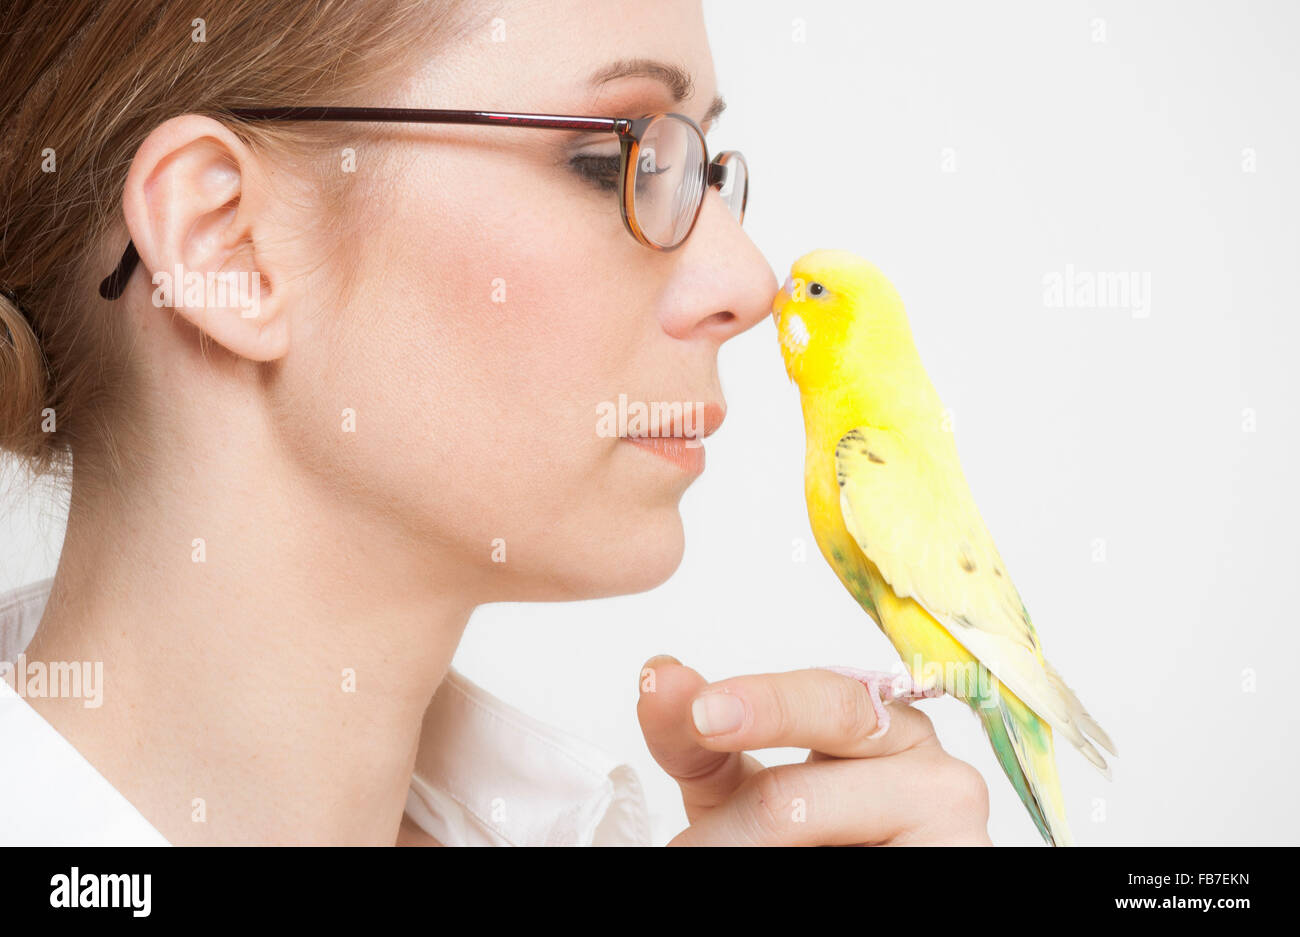 Close-up of beautiful woman touching yellow budgerigar on nose against white background Stock Photo